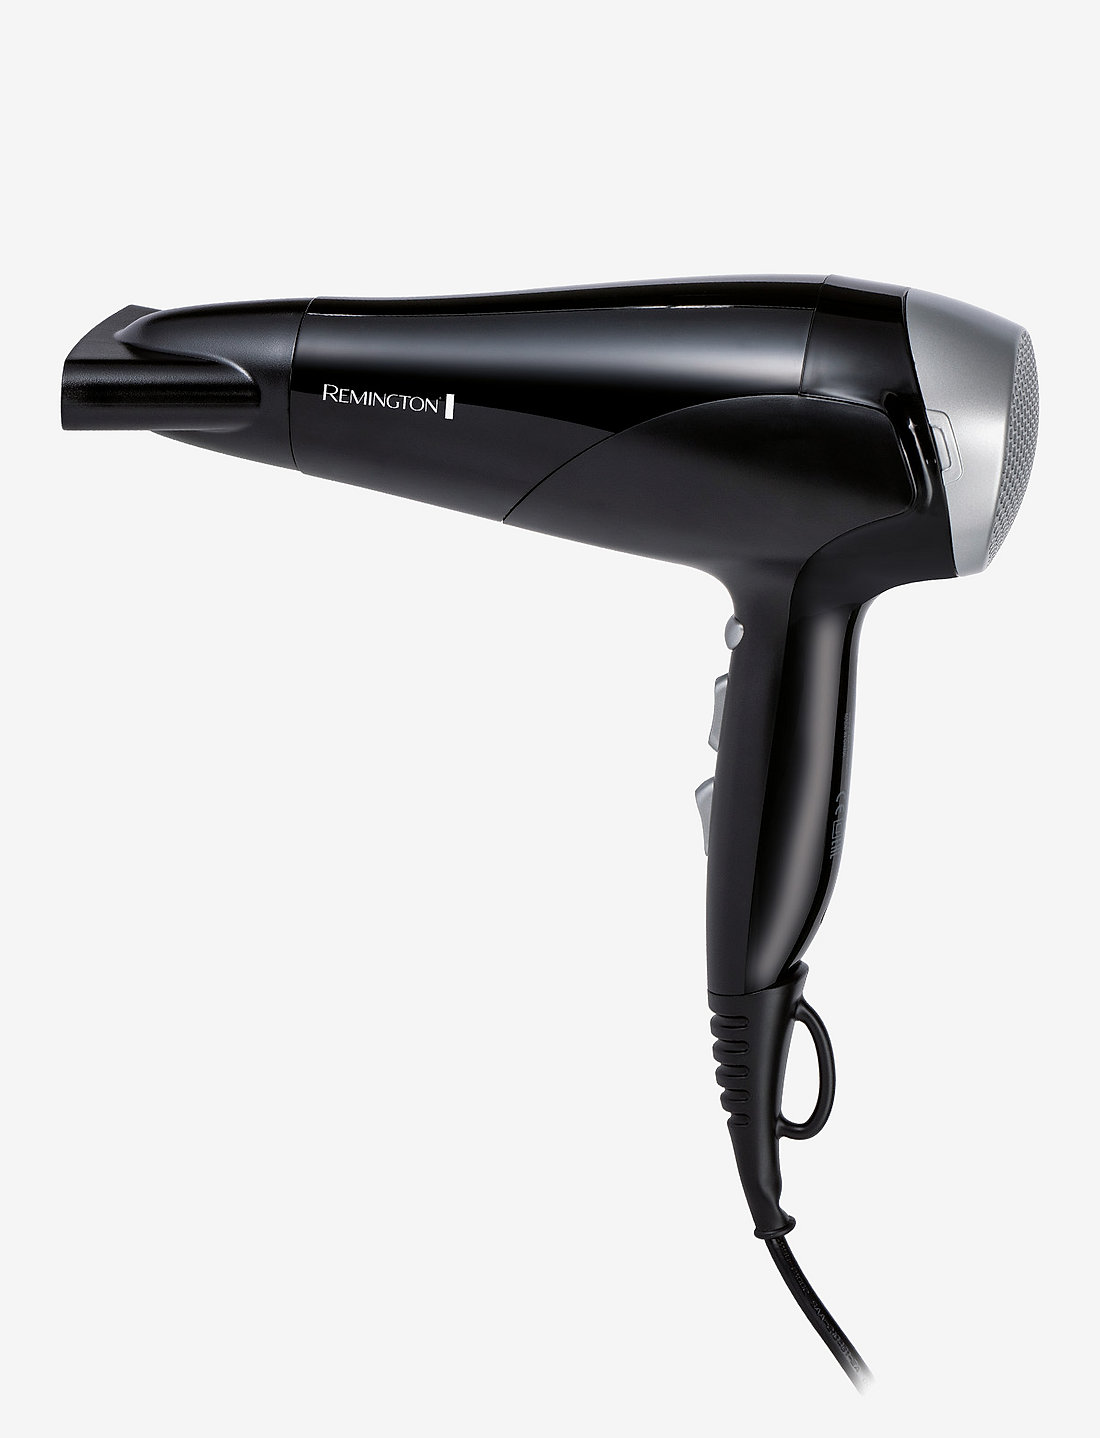 Remington D3171gp Style Edition Hairdryer Gift Set - Bestsellers